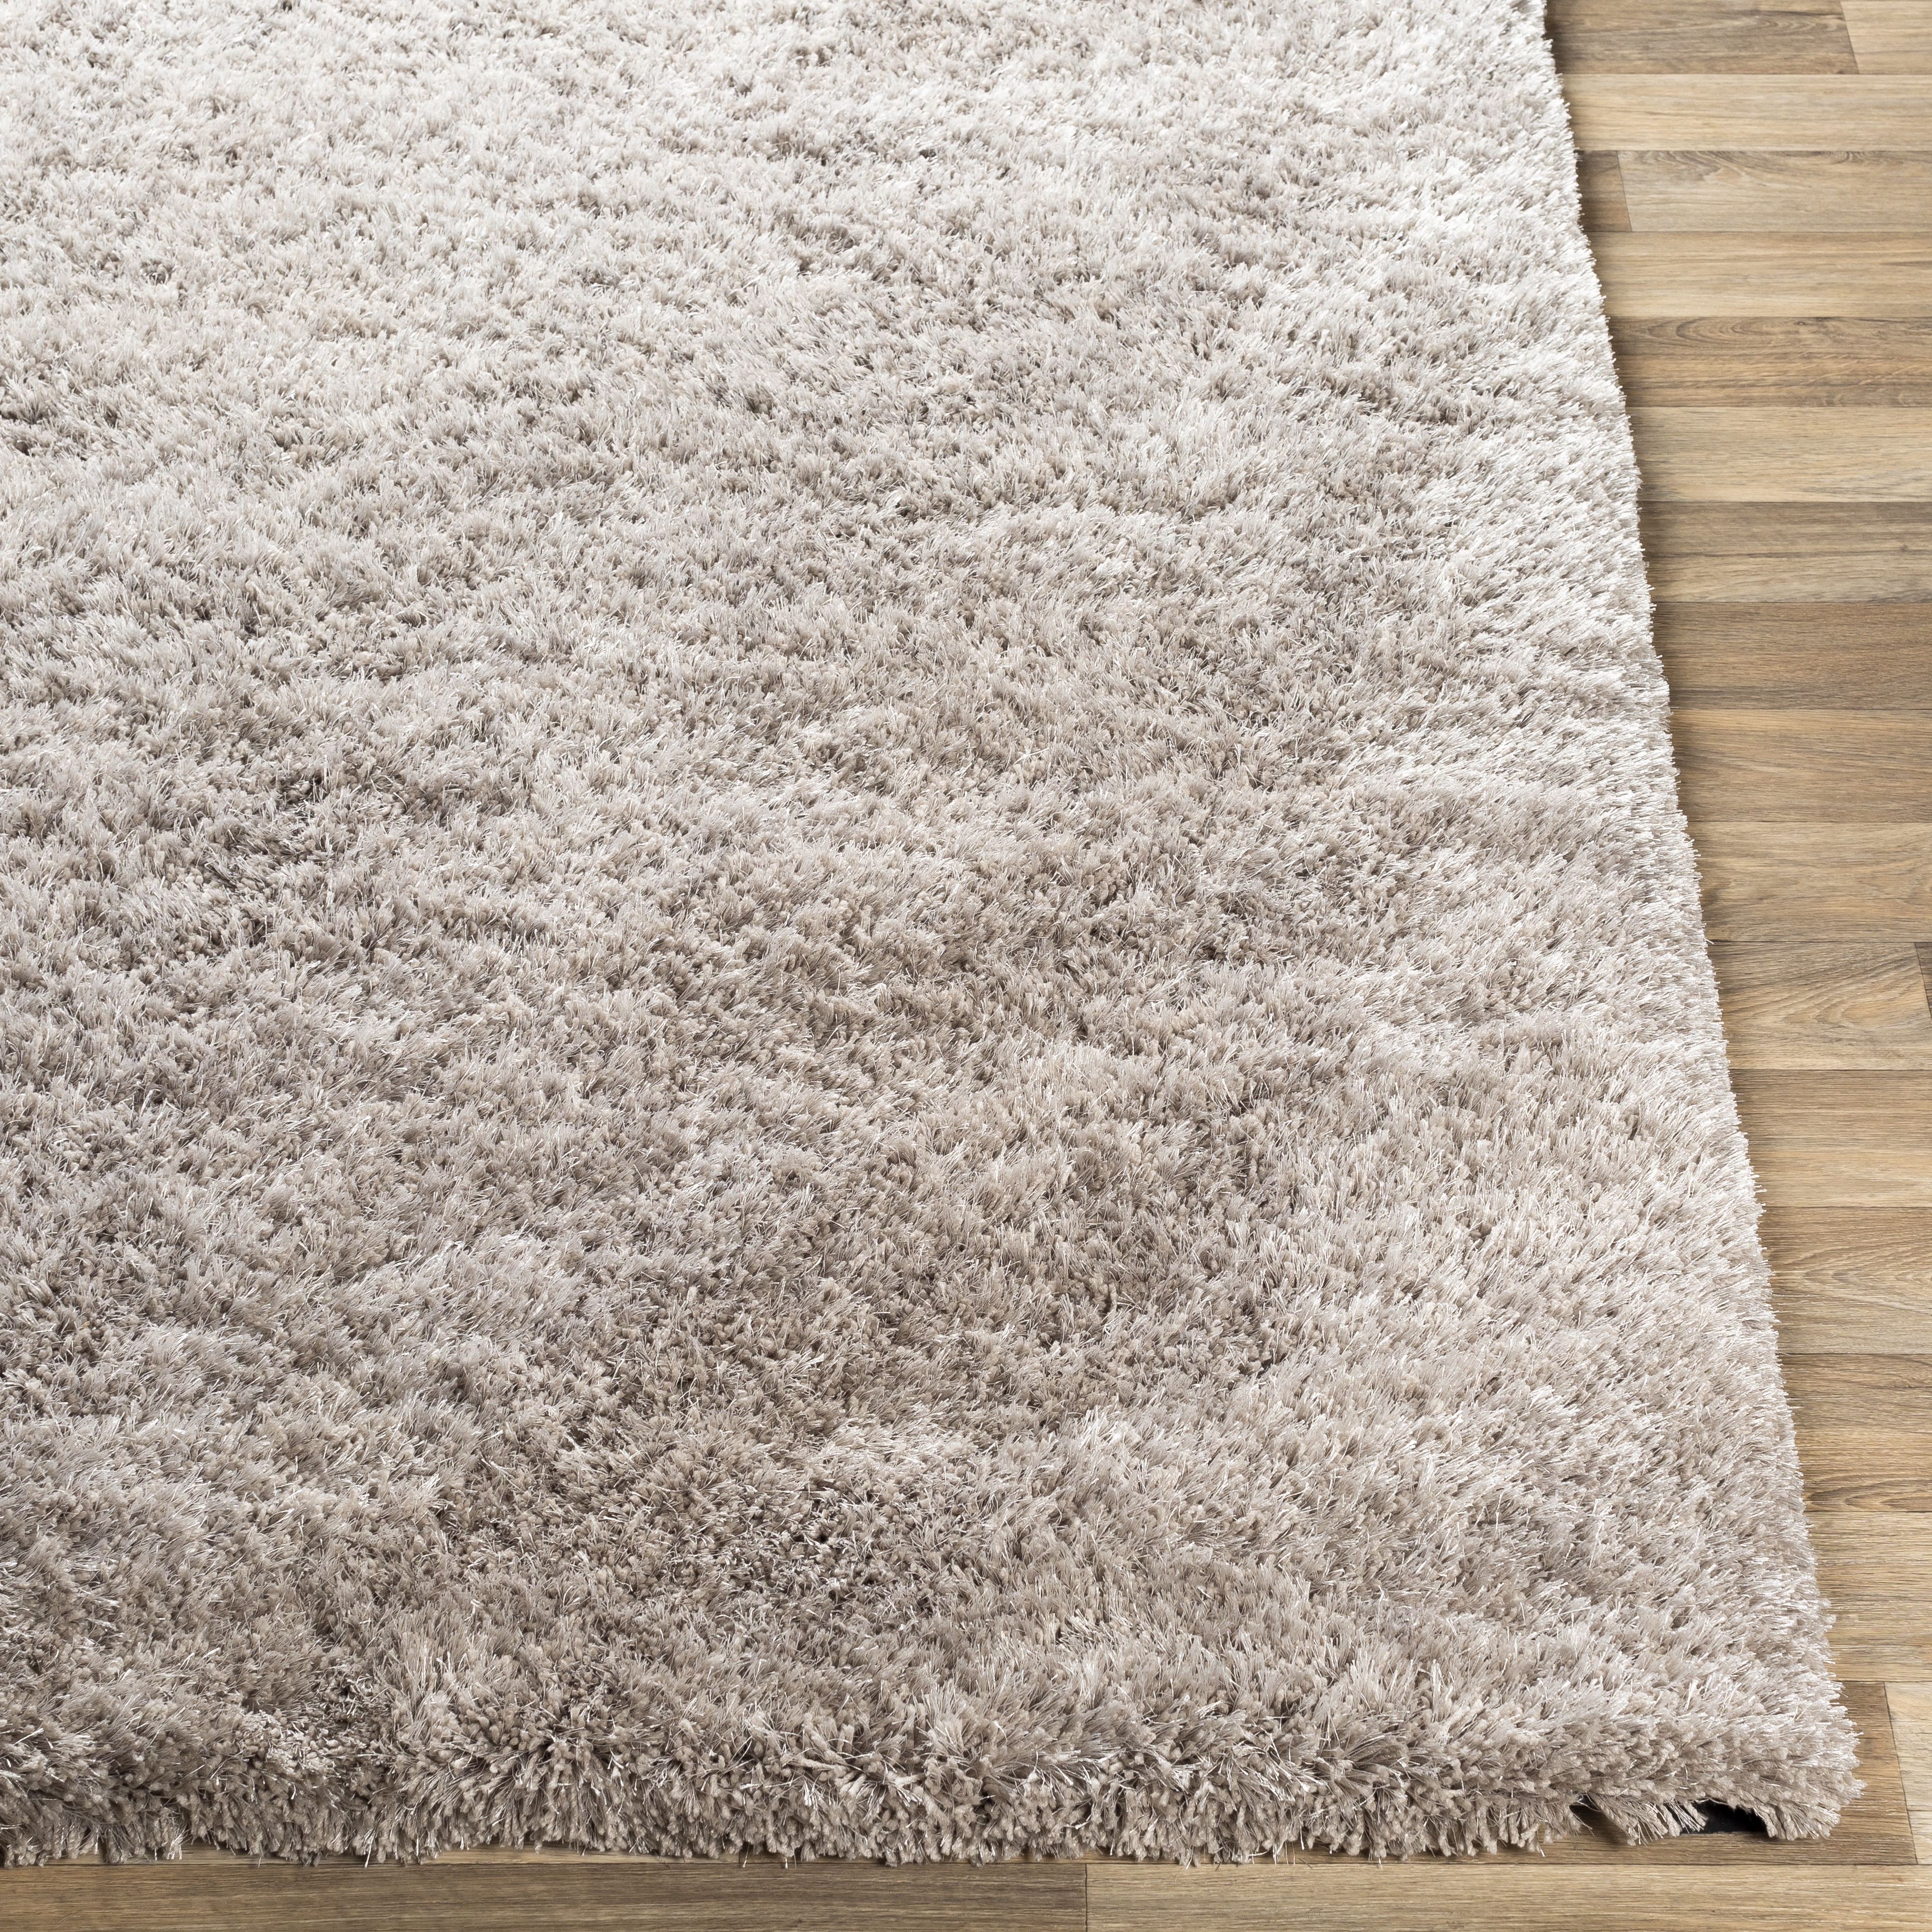 Grizzly Rug, 2' x 3' - Image 2